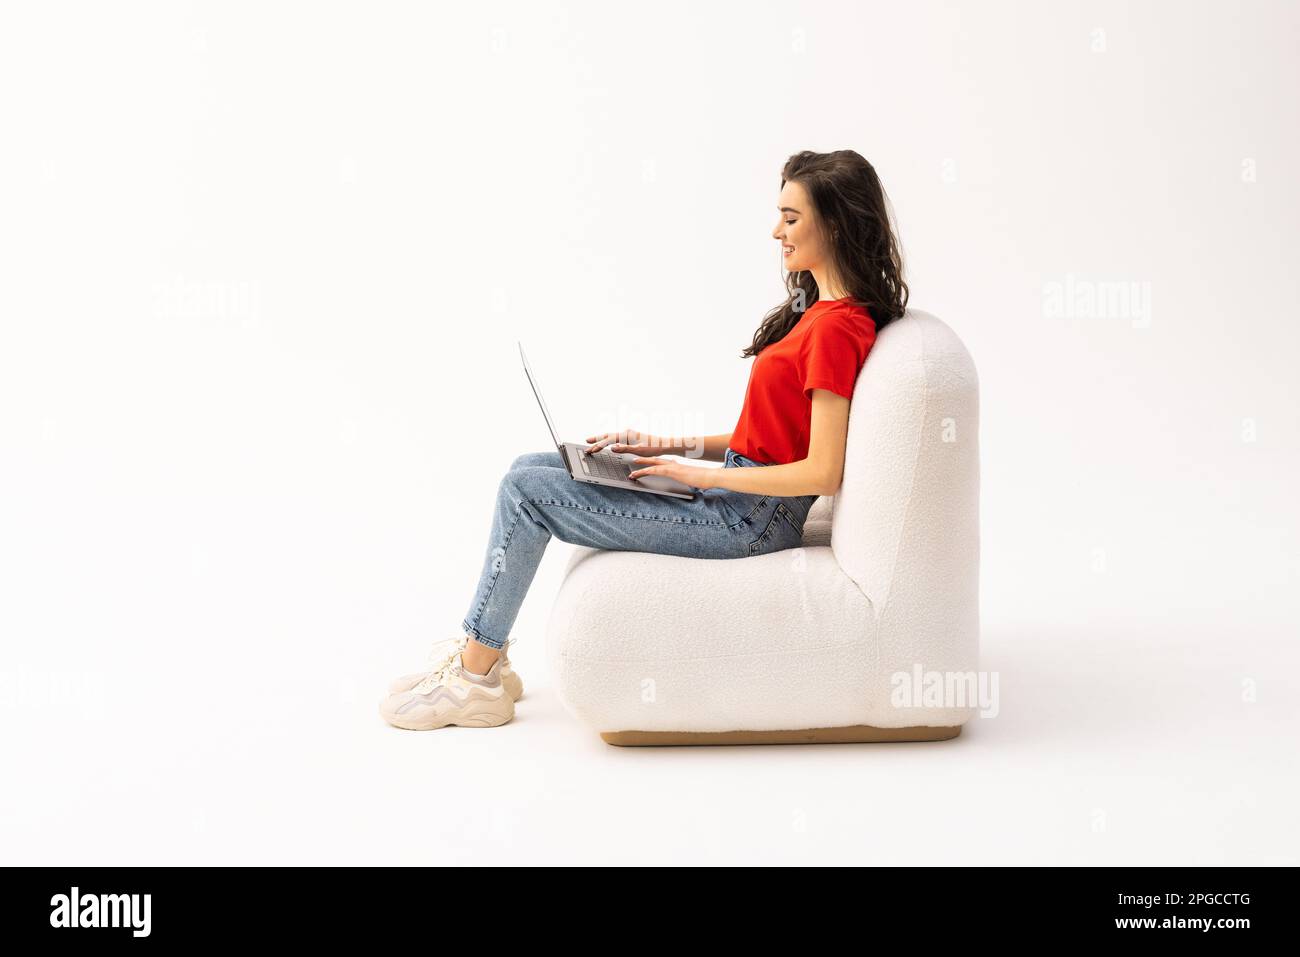 Portrait of a smiling young businesswoman sitting in a chair with laptop computer against white background Stock Photo